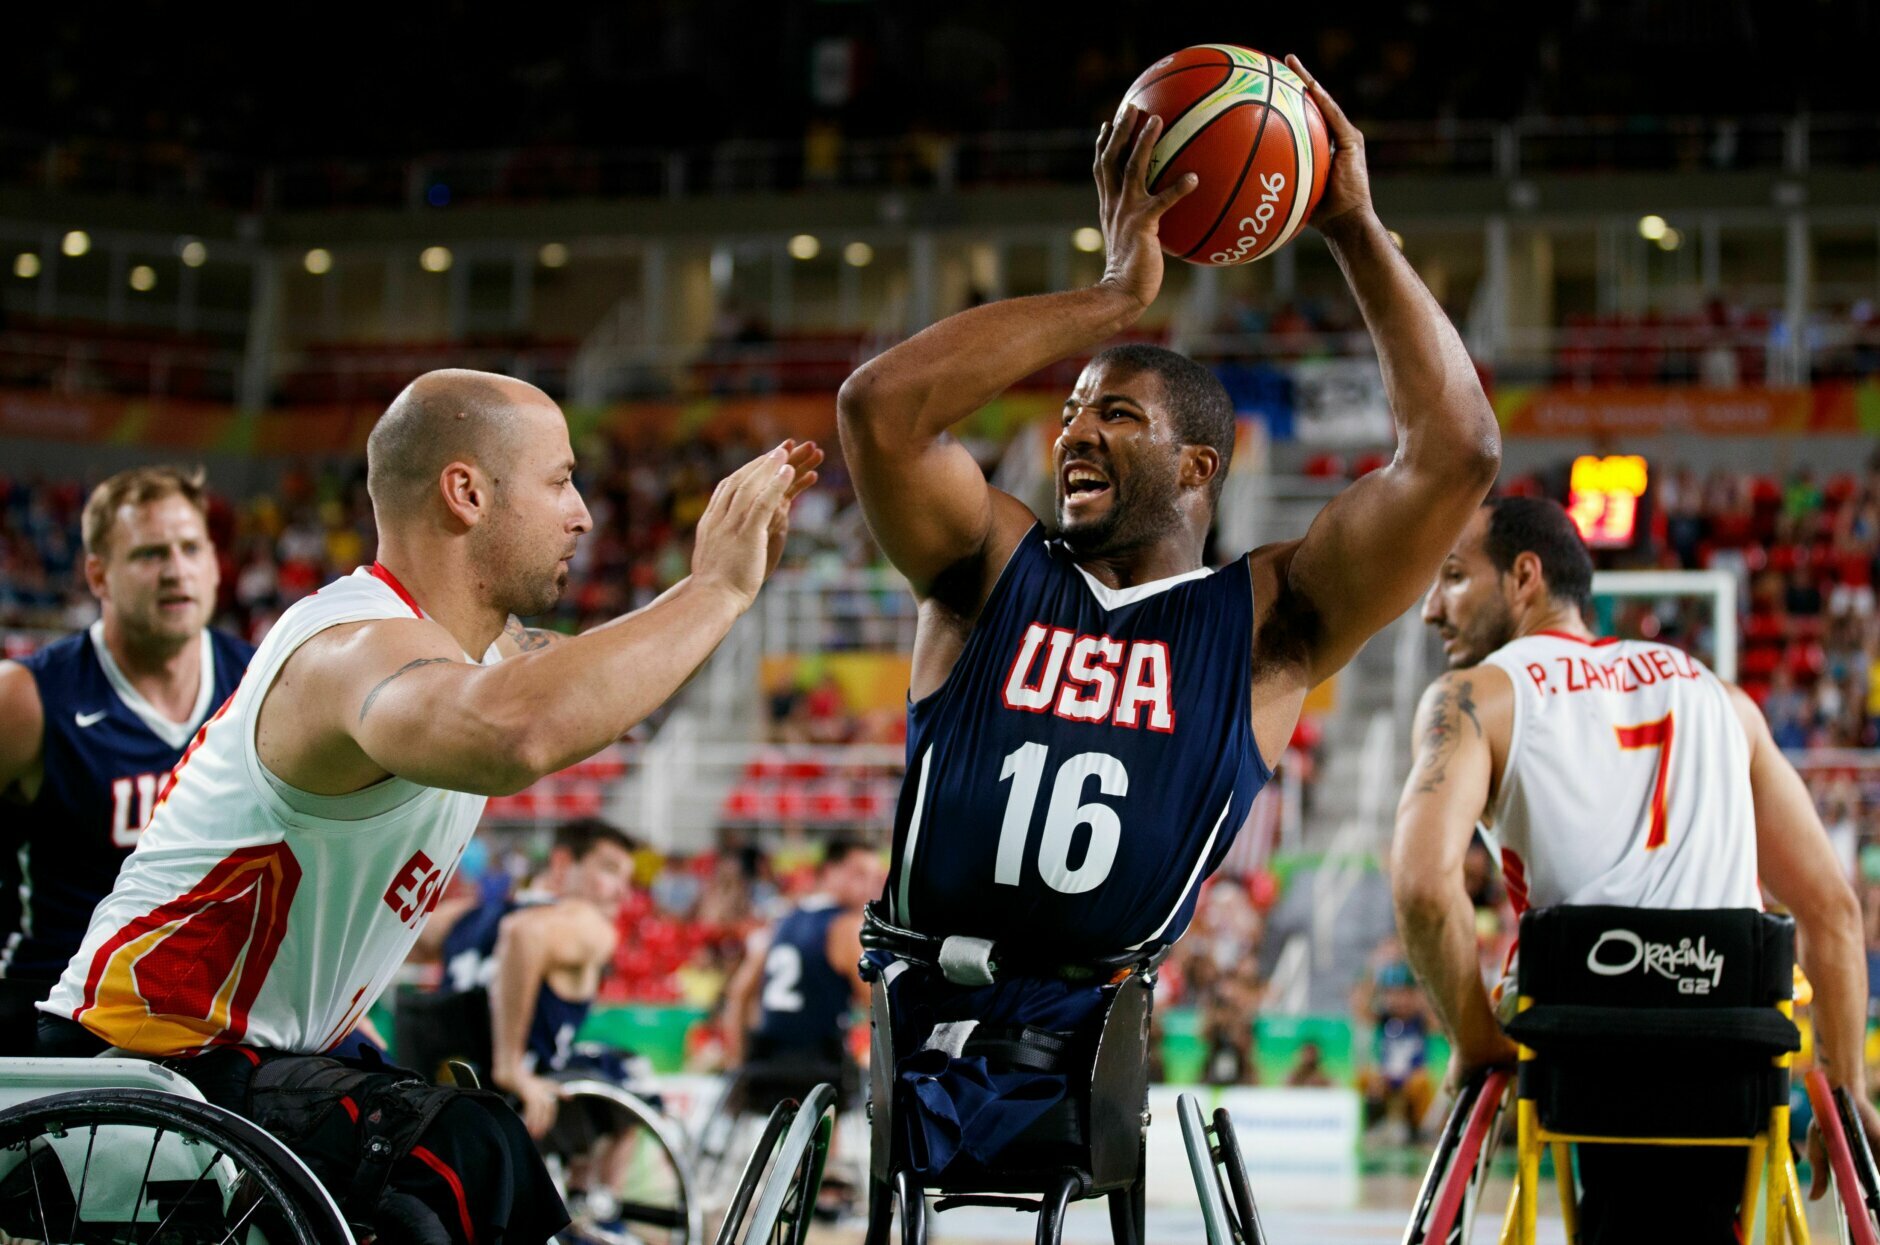 <p><strong>Trevon Jenifer (Huntingtown, Maryland) &#8212; Wheelchair basketball </strong></p>
<p><strong>Notable facts:</strong> Jenifer will compete in his third Paralympics after helping Team USA bring home gold in 2016 and a bronze medal in the 2012 Games. The Huntingtown High School graduate never let his congenital amputation stand in the way of also dominating in wrestling &#8212; Jenifer finished third in his weight class at the Maryland state tournament his senior year against able-bodied wrestlers. He also competed in track in high school and began his wheelchair basketball career with Air Capital, in D.C.</p>
<p><strong>Classification: </strong>2.5</p>
<p><strong>Competition: </strong>Wheelchair basketball &#8212; Aug. 26 &#8211; Sept. 5</p>
